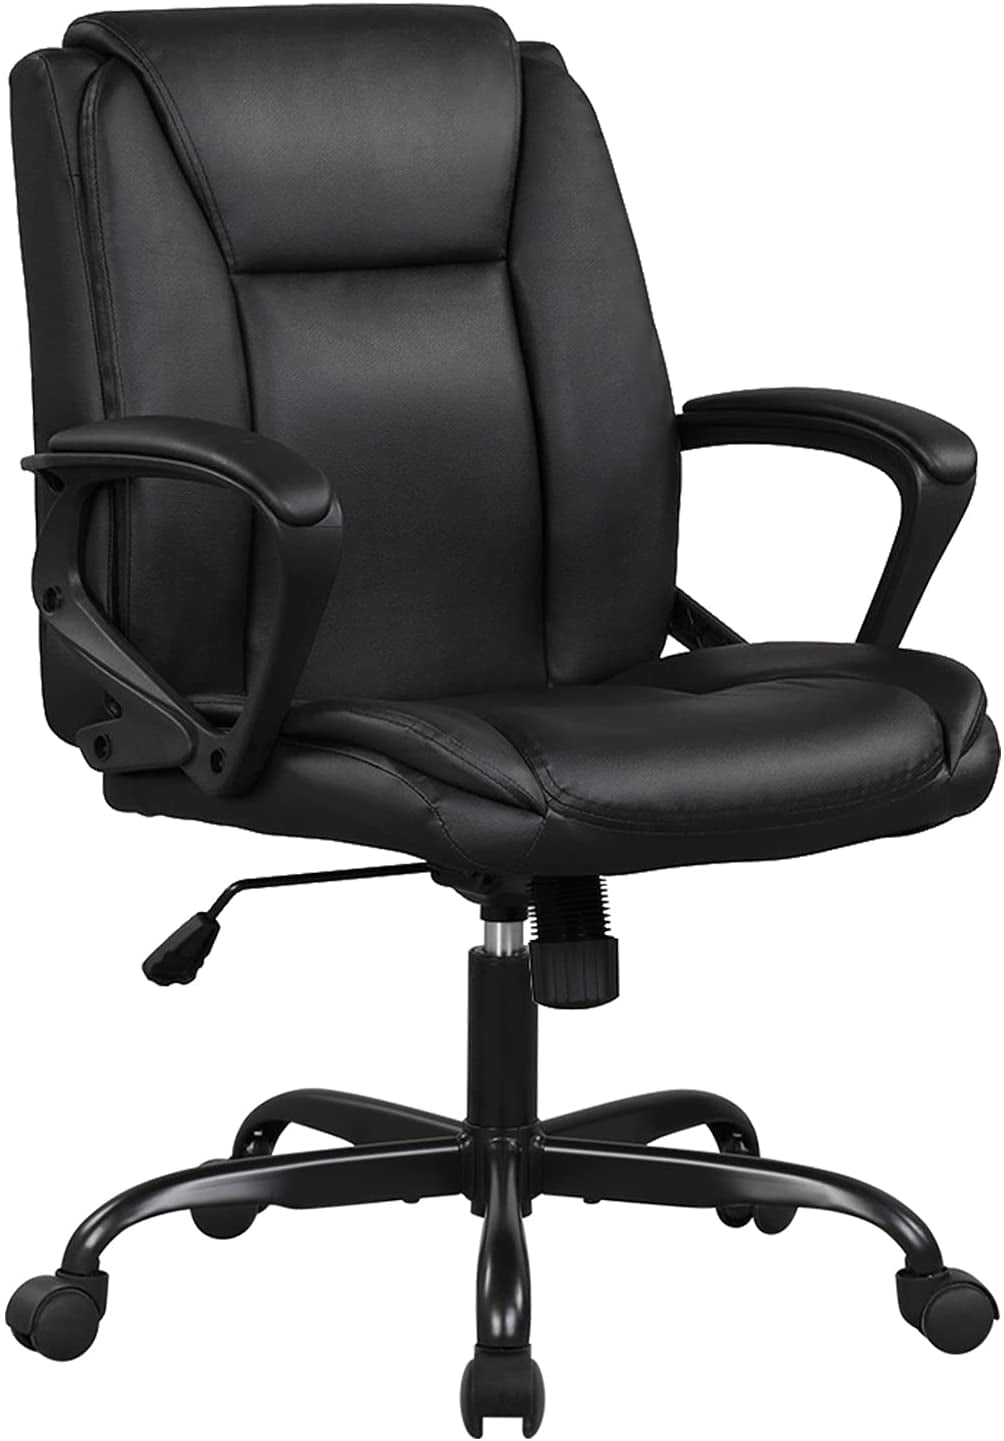 Ergonomic Desk Task Executive Chair Rolling Swivel Chair Adjustable Computer Chair with Lumbar Support Headrest PU Leather Chair for Women Men Home Office Chair Black 